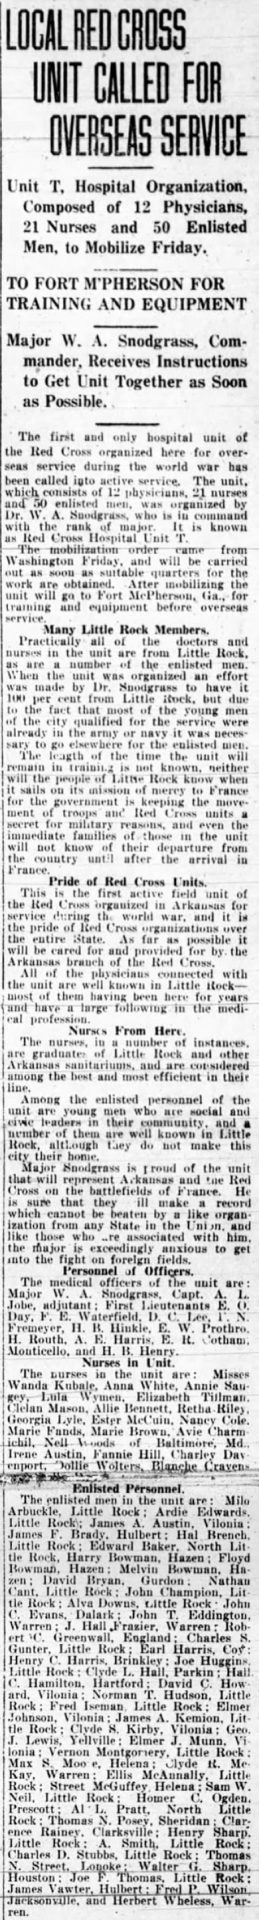 "Local Red Cross unit called for overseas service" newspaper clipping